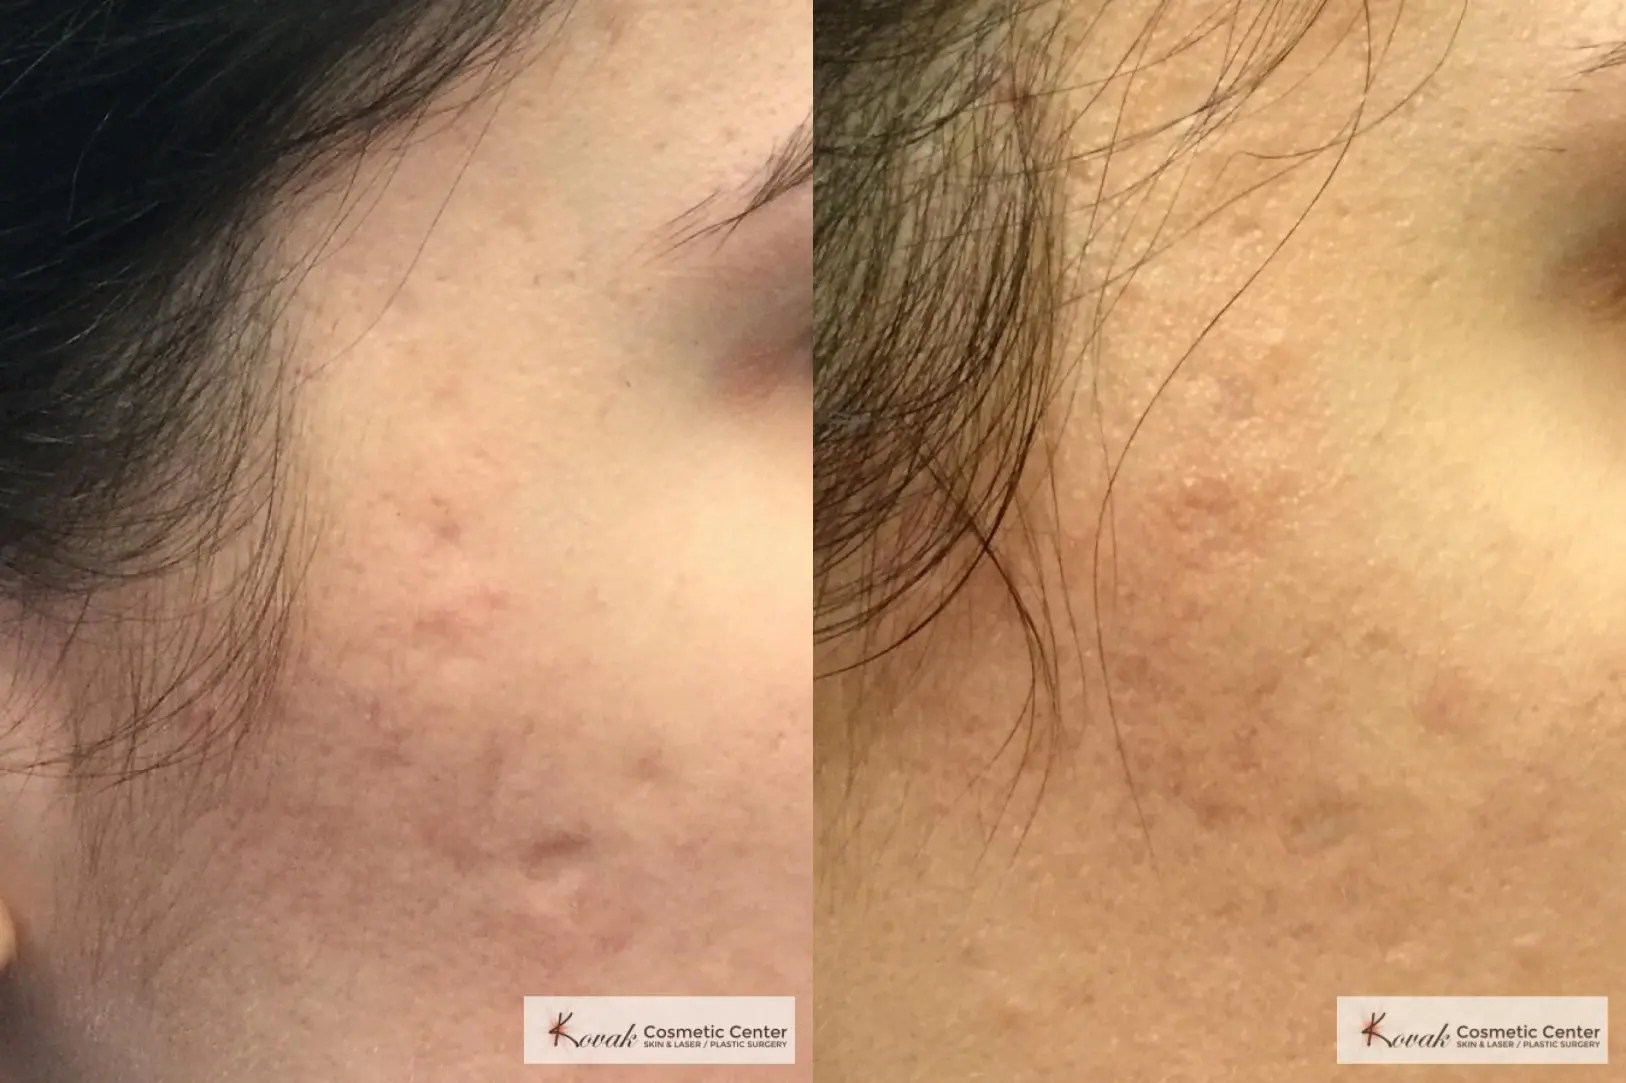 Acne Scars treated with Venus Viva and Juvederm on 28 year old woman - Before and After  